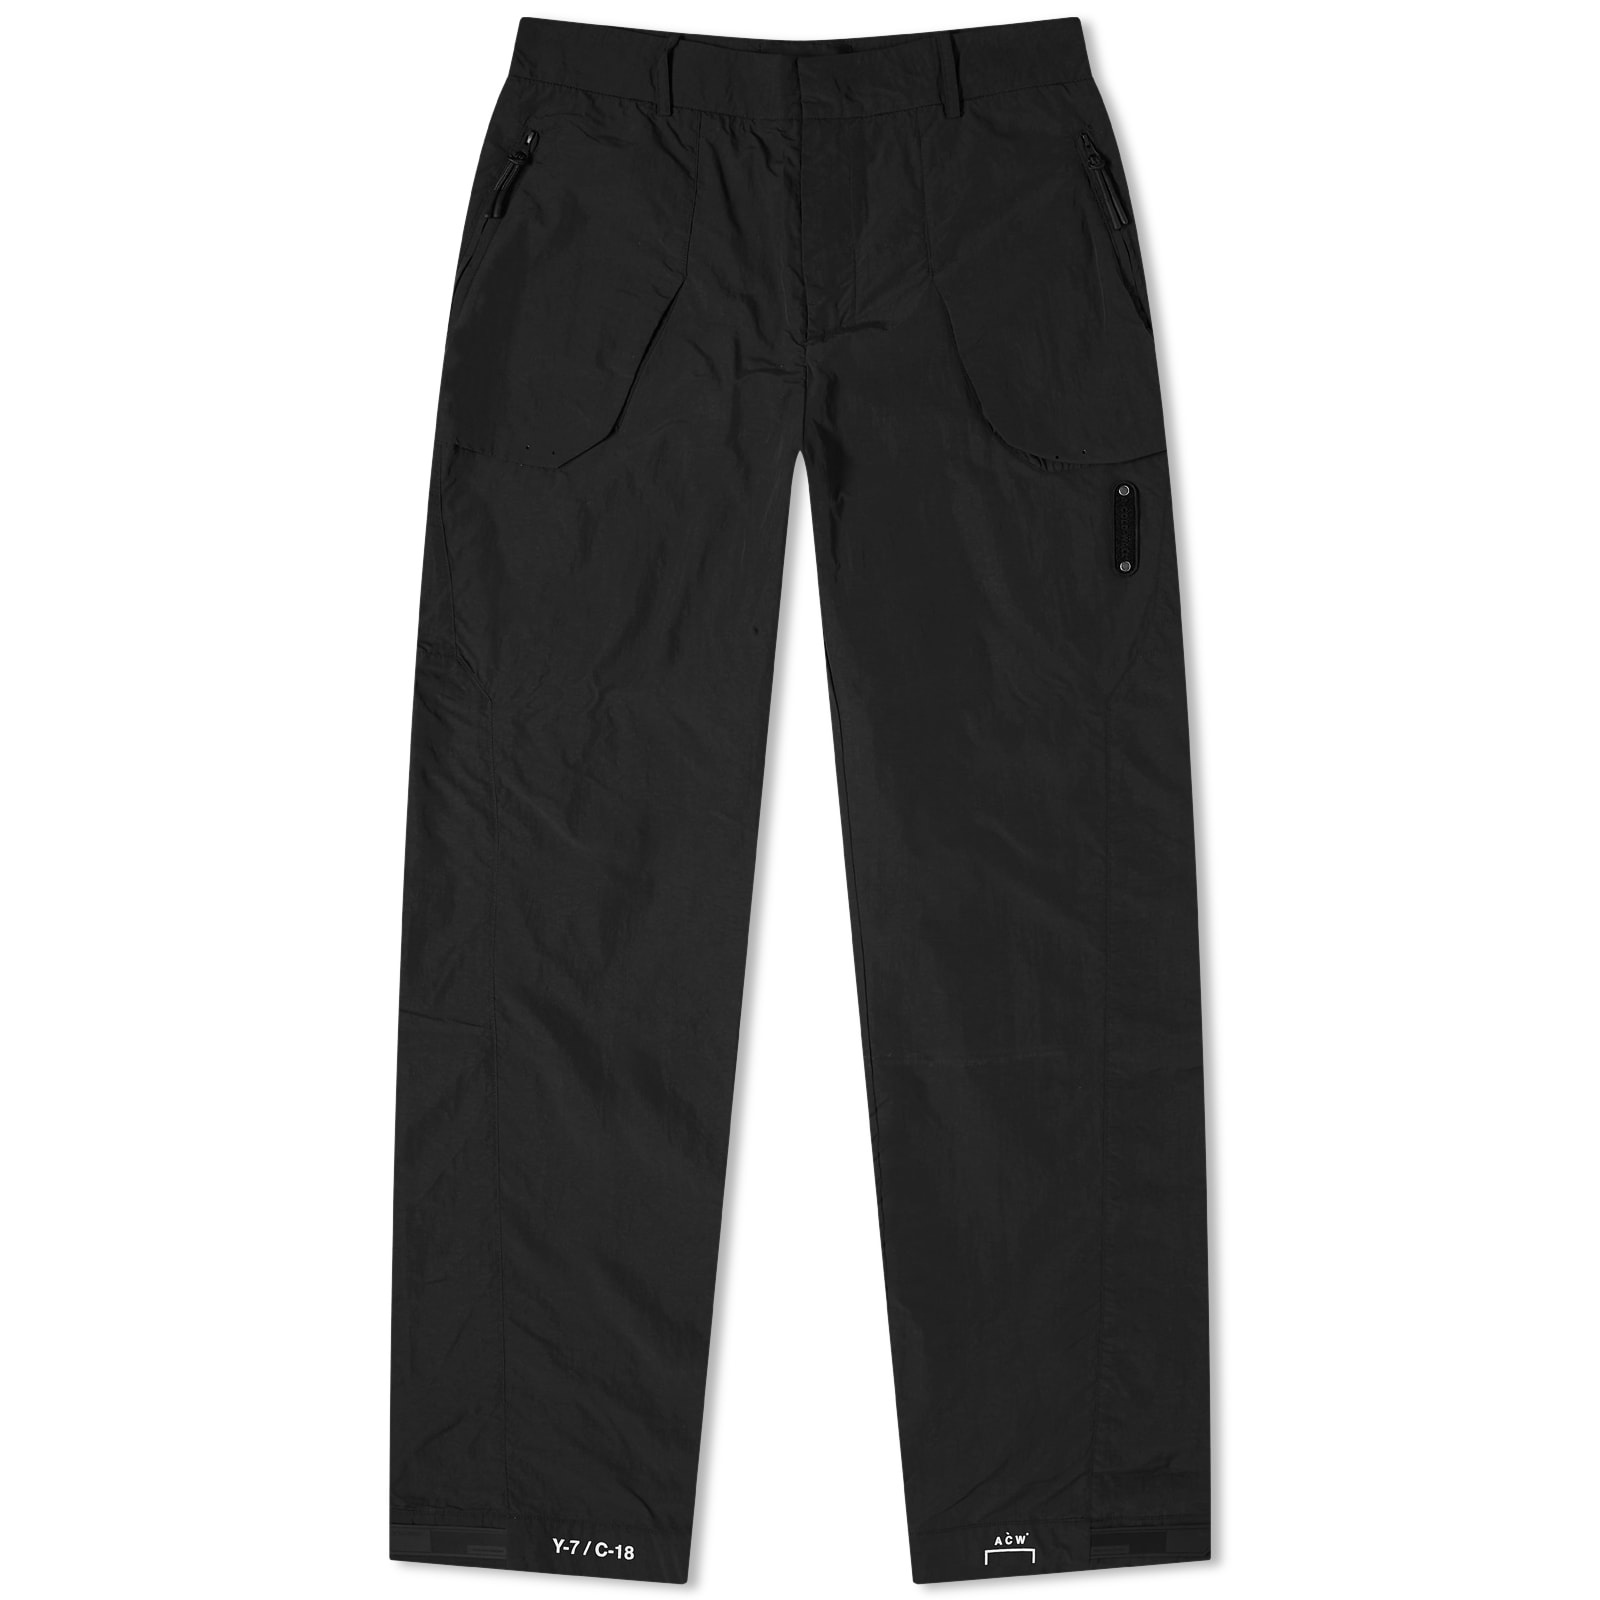 A-COLD-WALL* System Trousers - 1